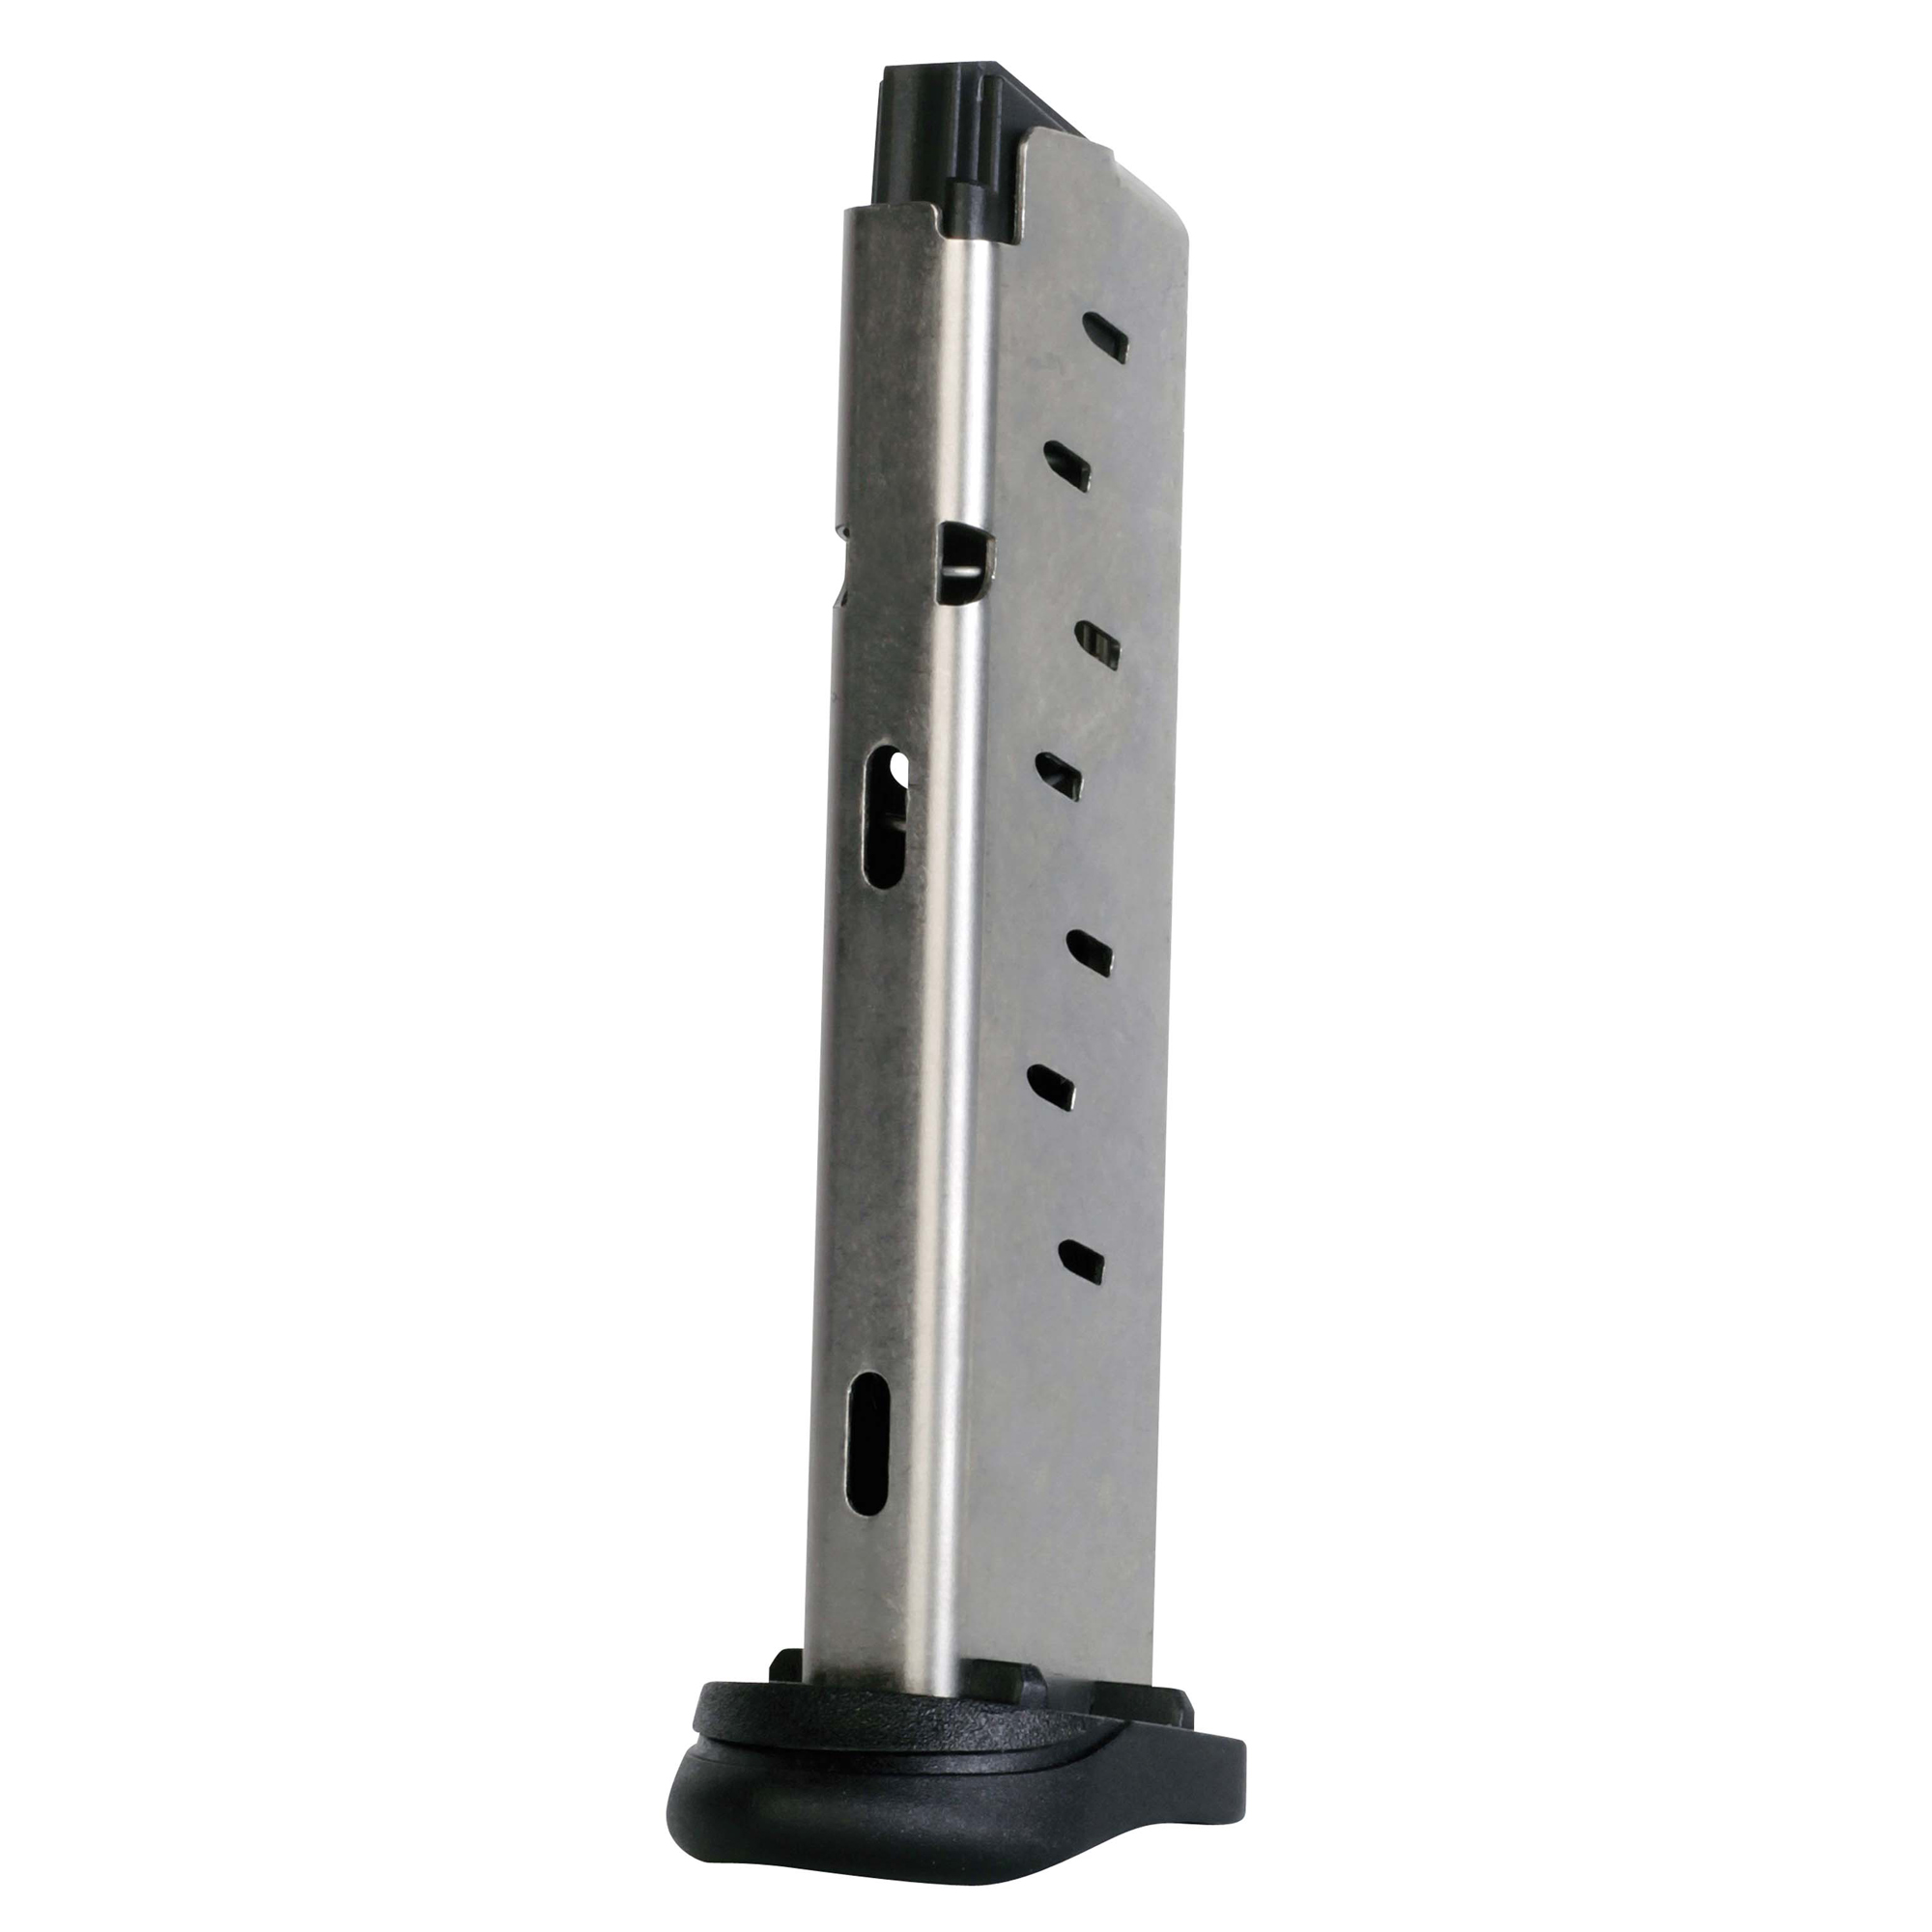 Walther PK380 OEM, Magazine, 380 ACP 8 Rounds Stainless Steel, 505600, UPC: 723364200700